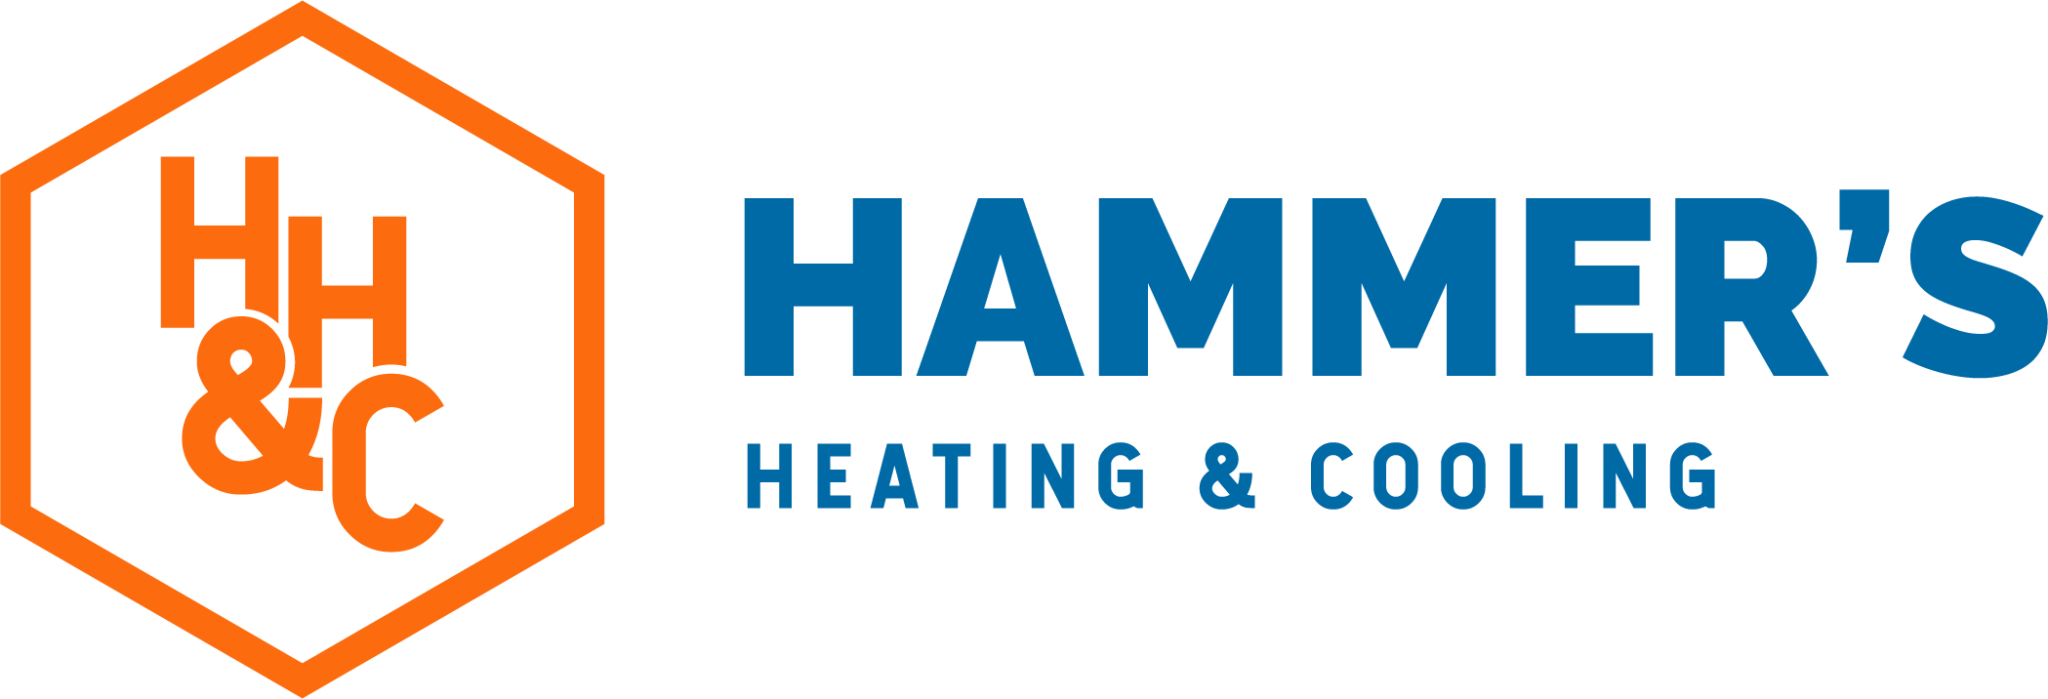 Hammer's Heating and Cooling